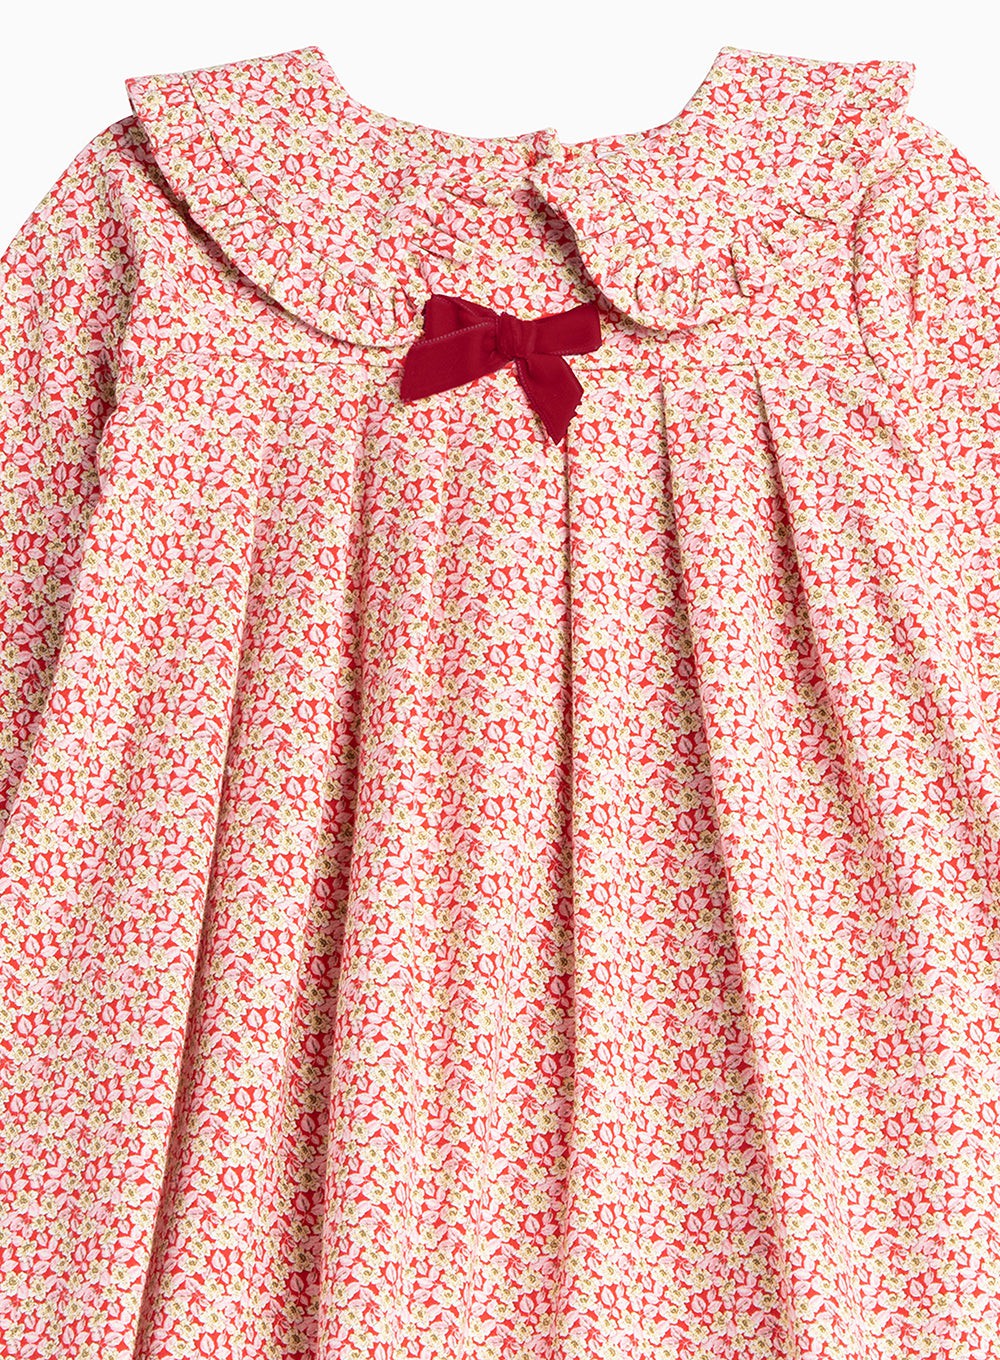 Confiture Dress Layla Pretty Collar Dress in Pink Red Floral